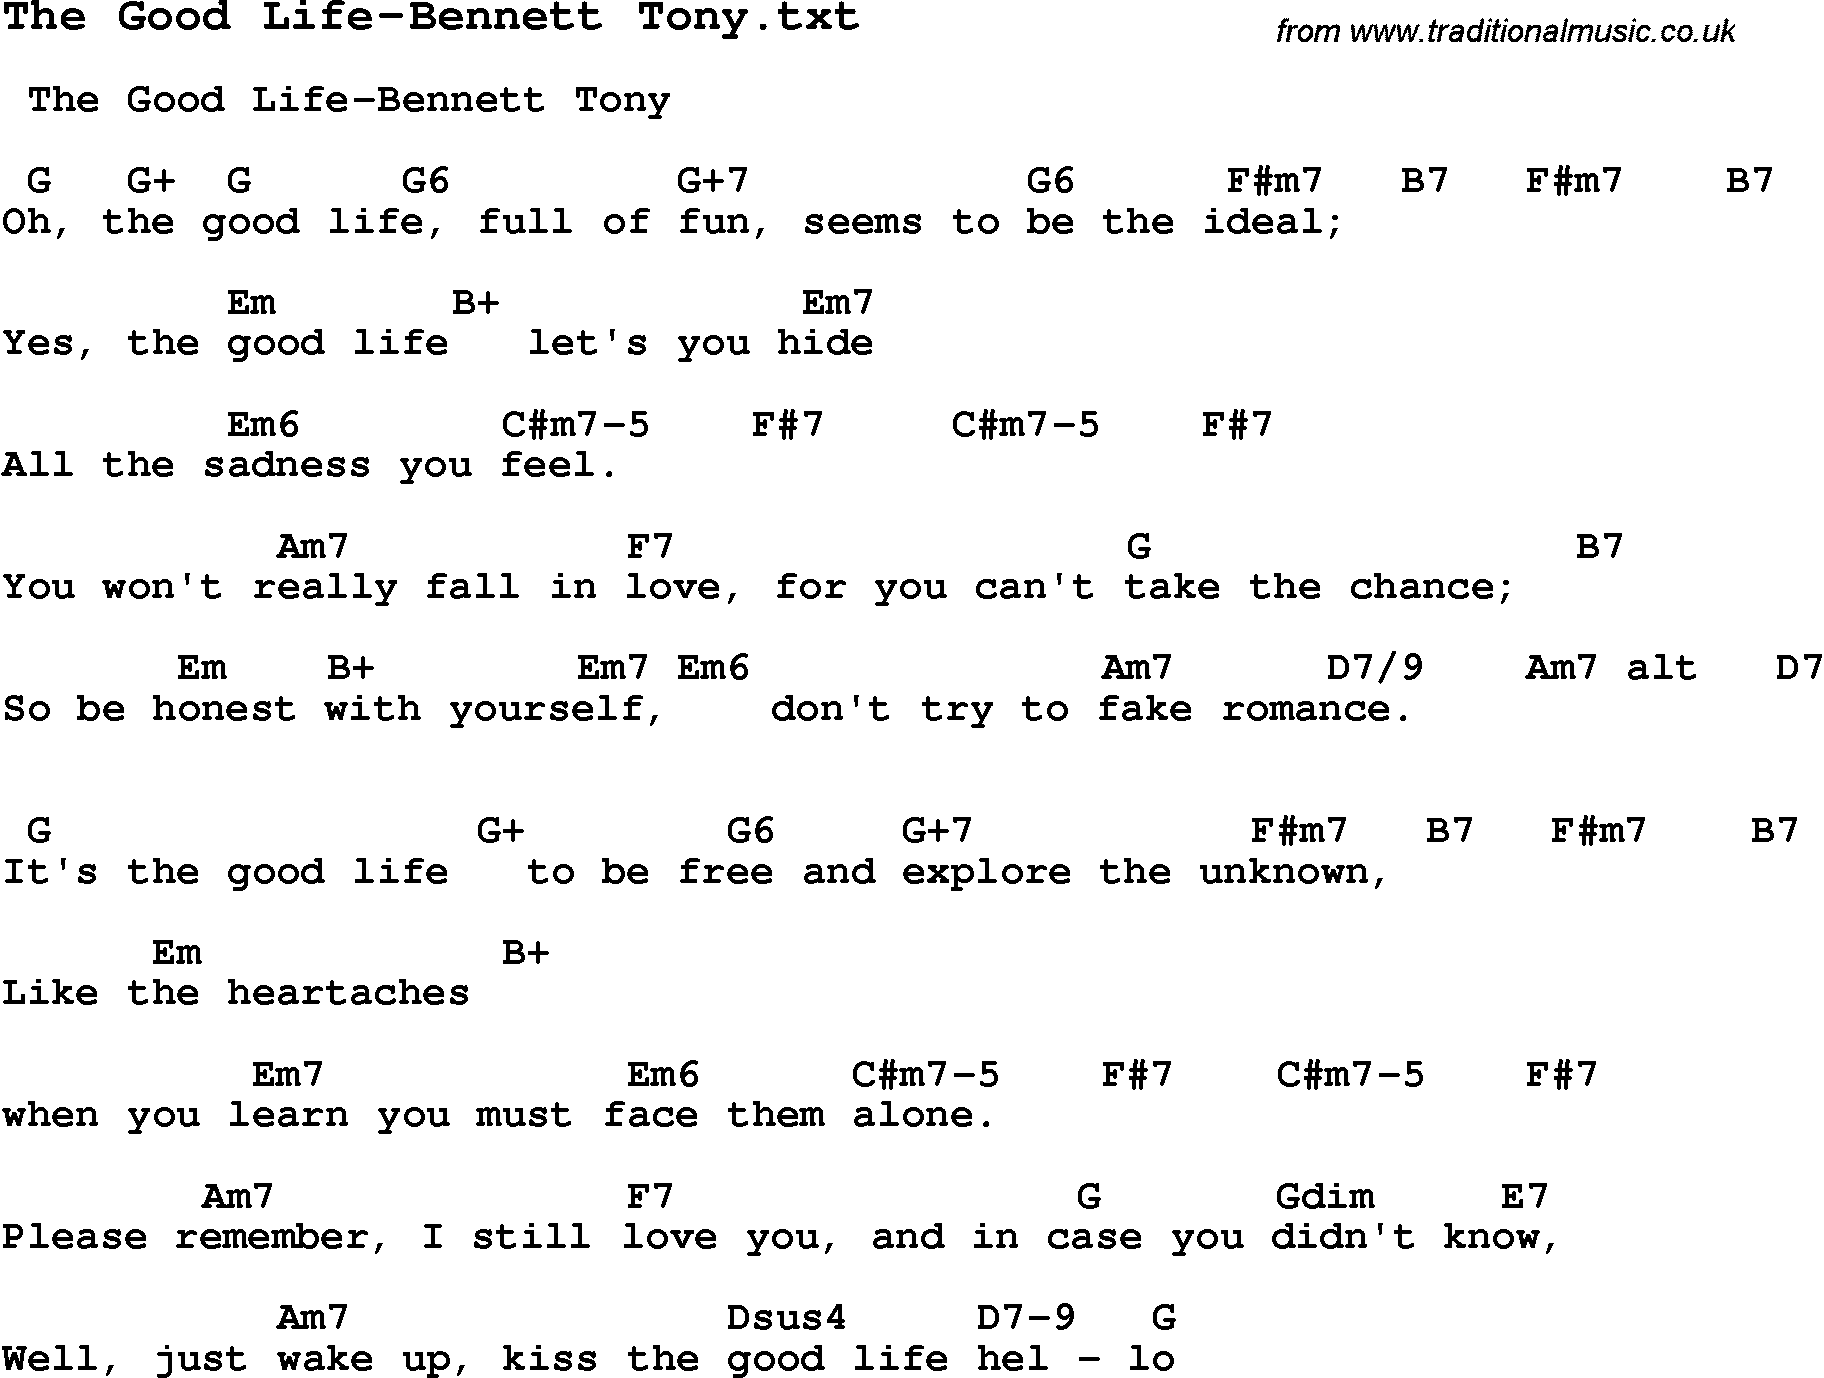 Jazz Song from top bands and vocal artists with chords, tabs and lyrics - The Good Life-Bennett Tony